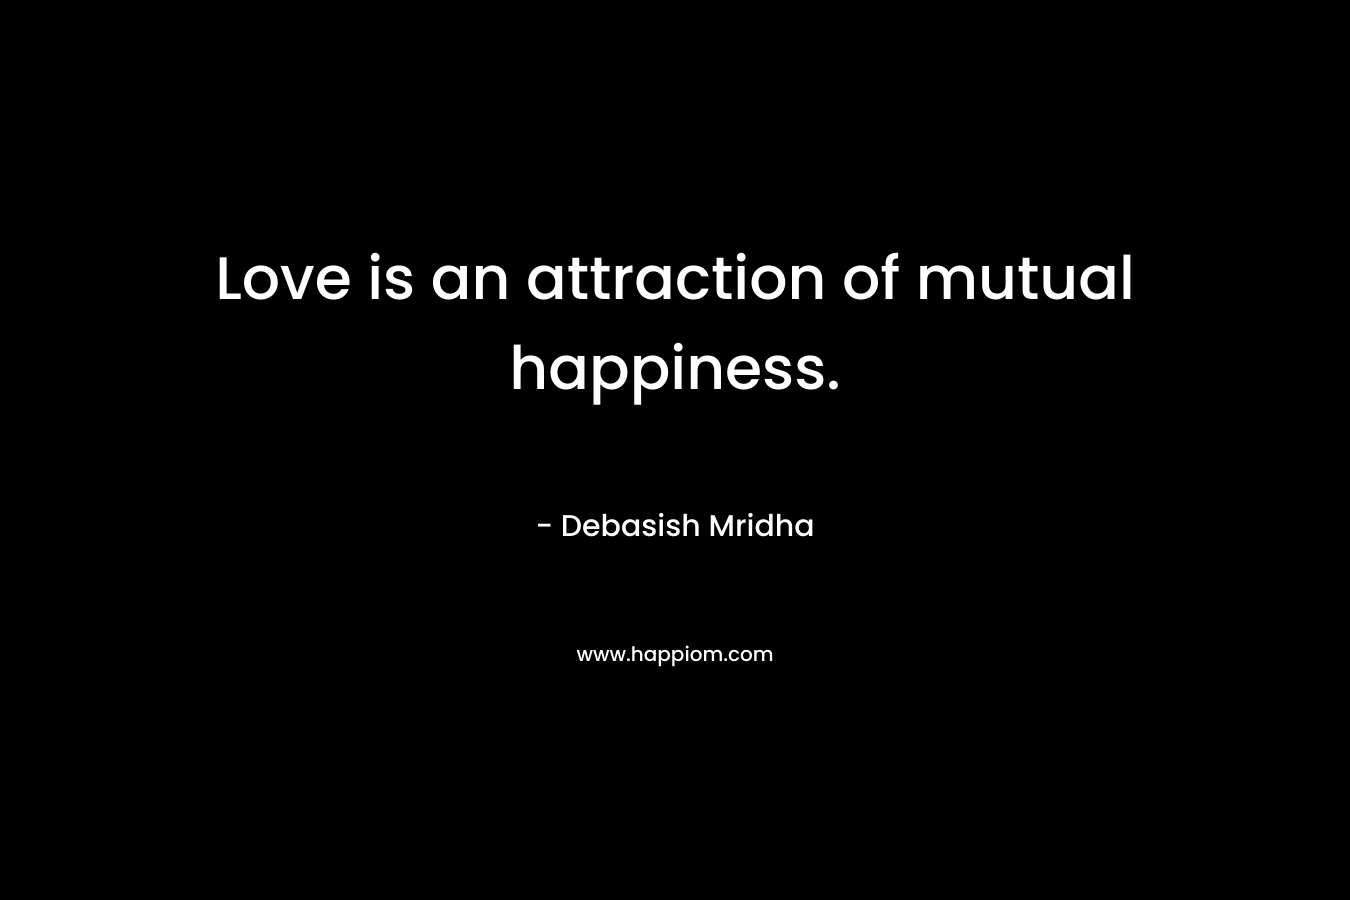 Love is an attraction of mutual happiness.